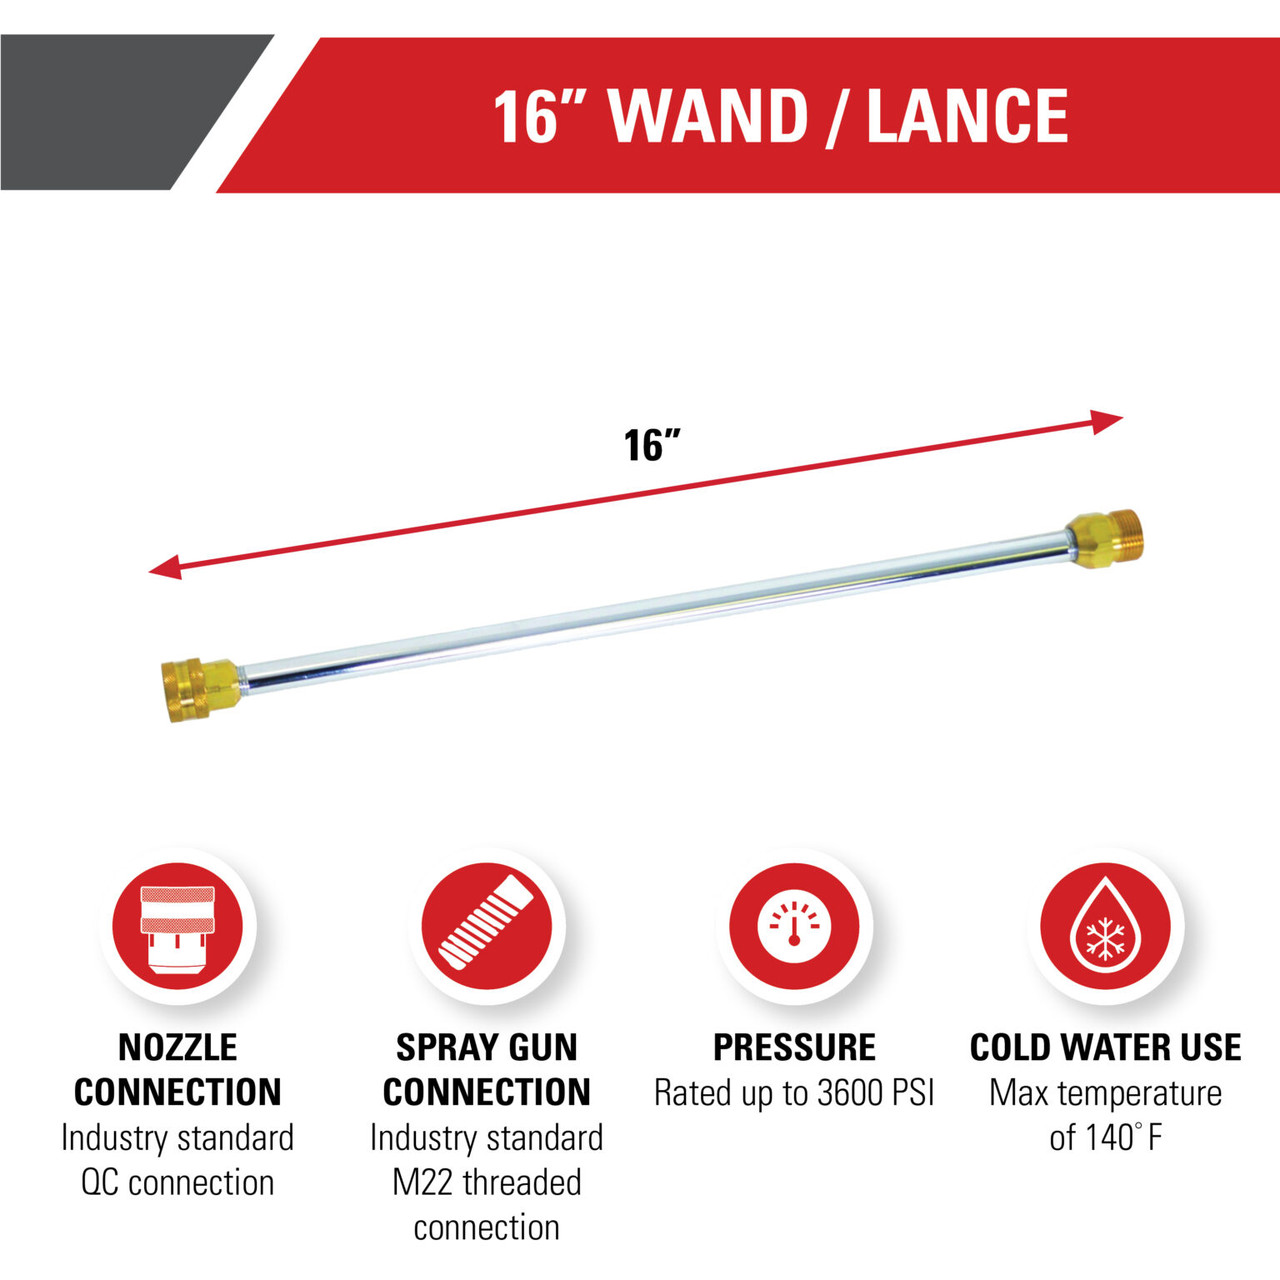 Universal 16-Inch Pressure Washer Wand Cold Water Use up to 3600 PSI 80149